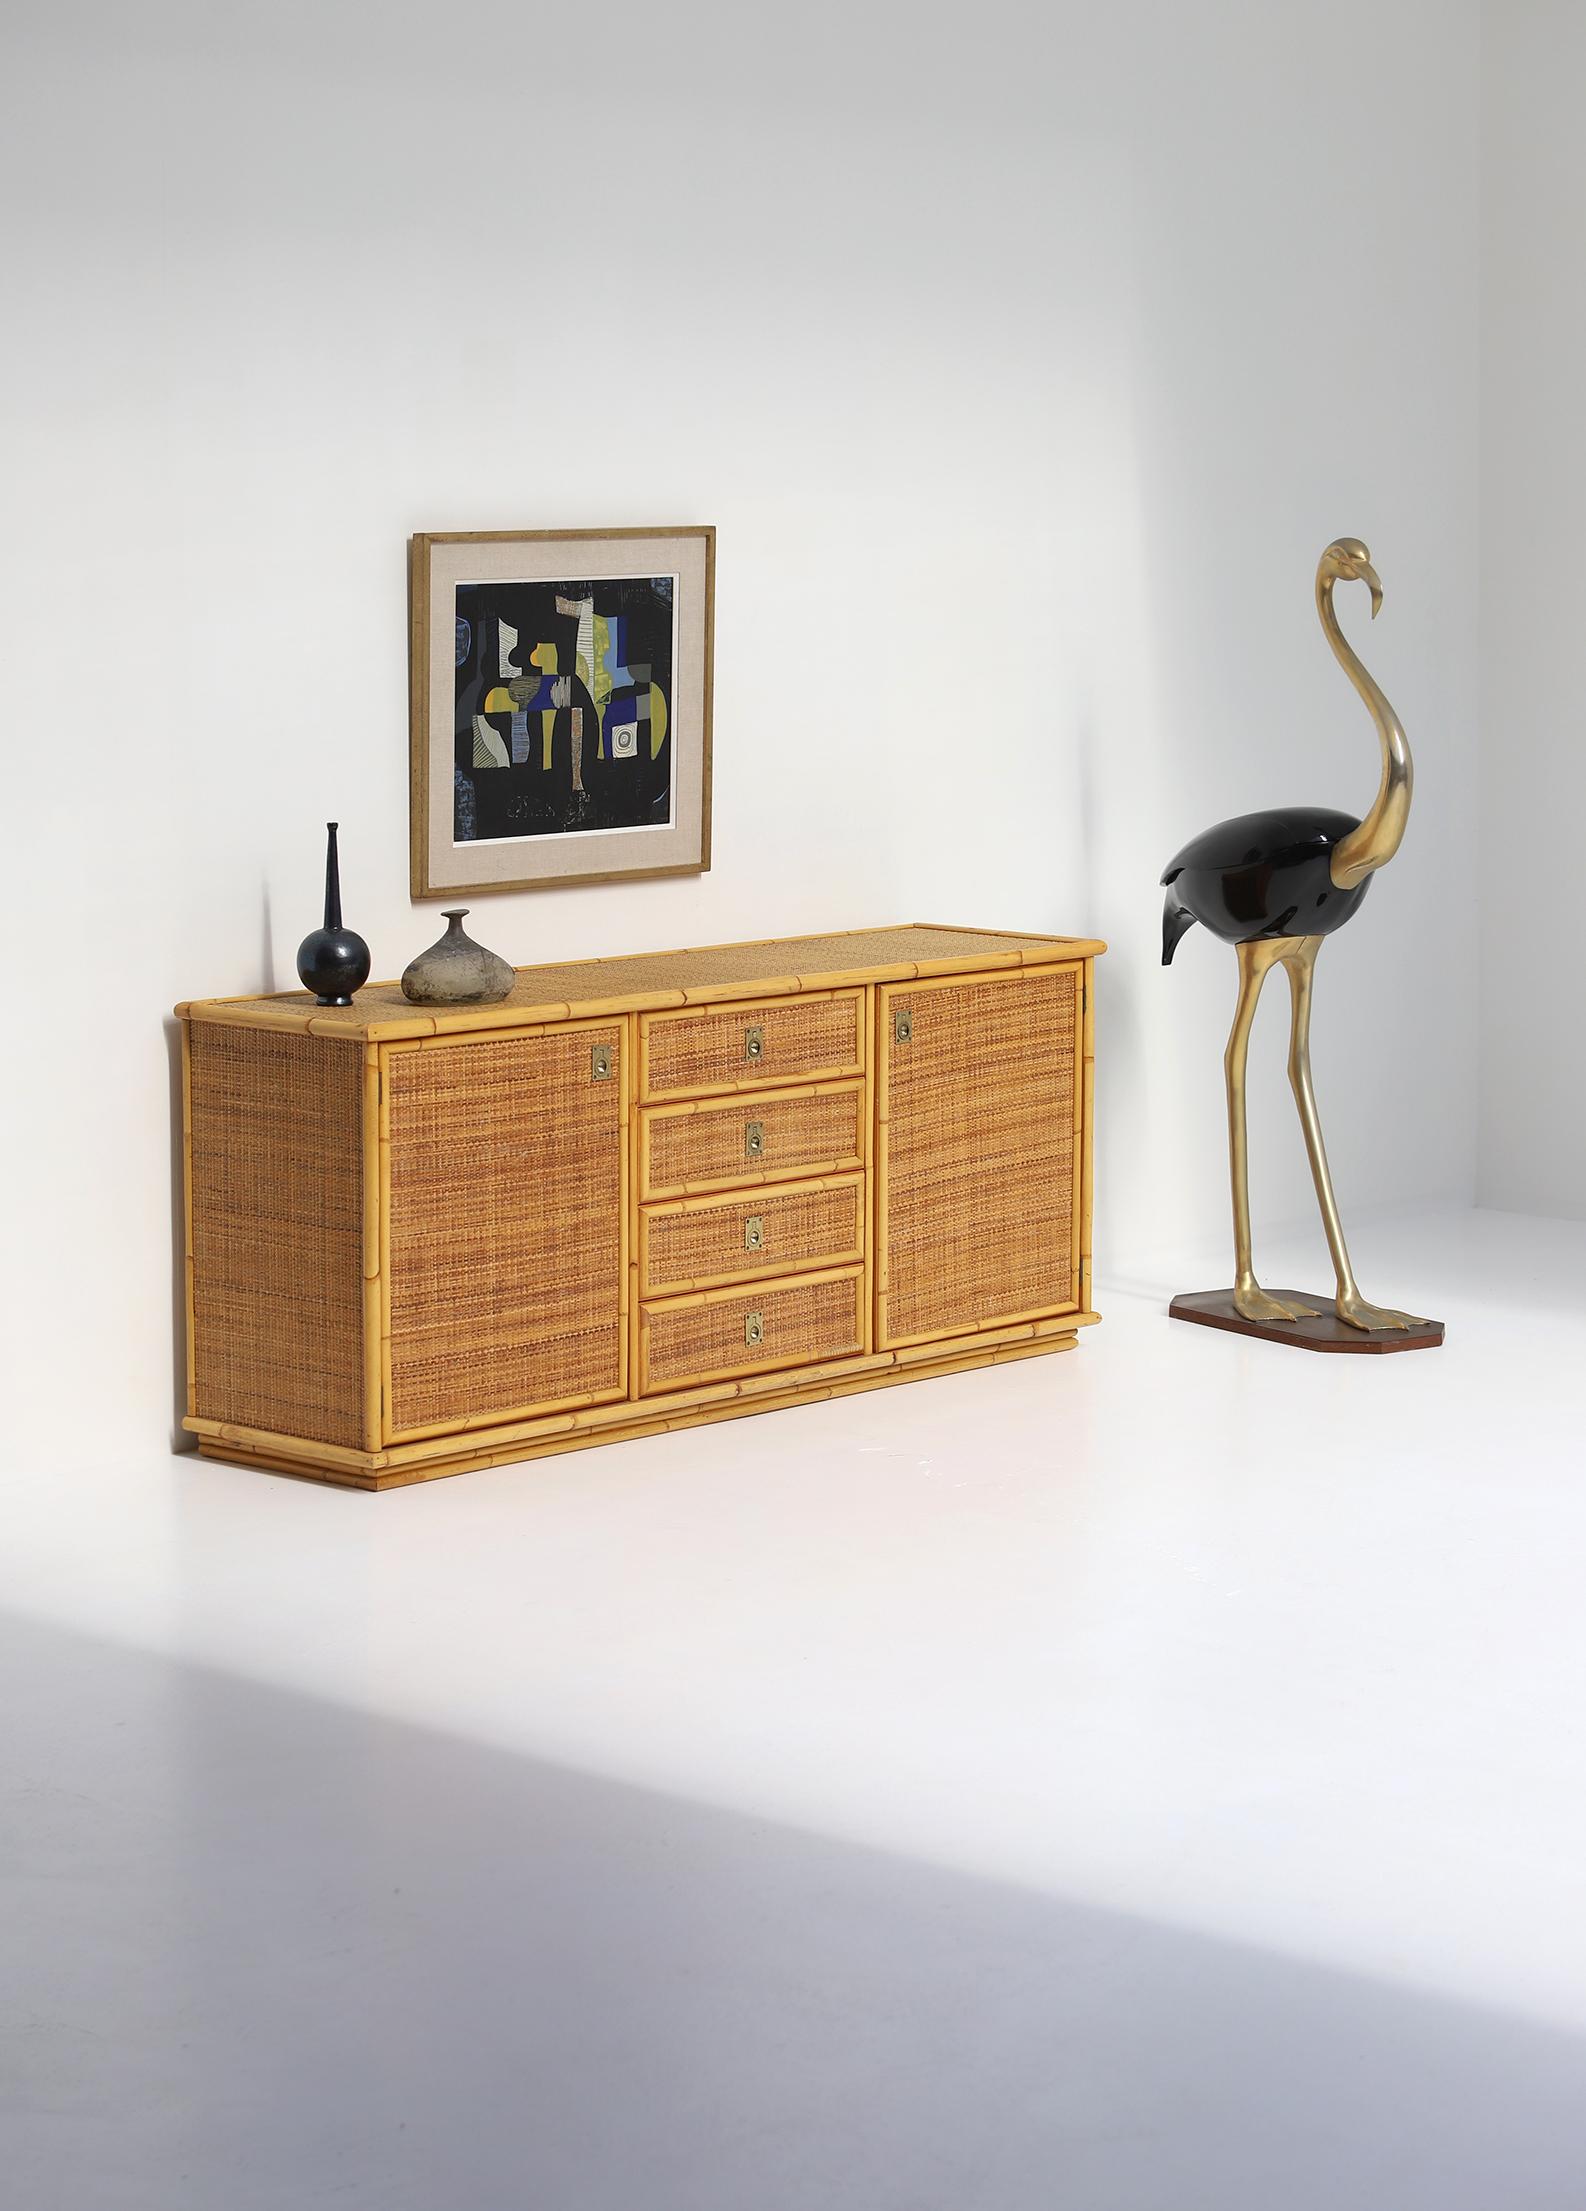 Beautiful wicker sideboard by Dal Vera, Italy that brings summer into your interior. This Rattan and wicker sideboard could be perfectly part of a Magnum Pi interior, where Tom Selleck drinks his cocktail on a sunday afternoon. Dal Vera is well